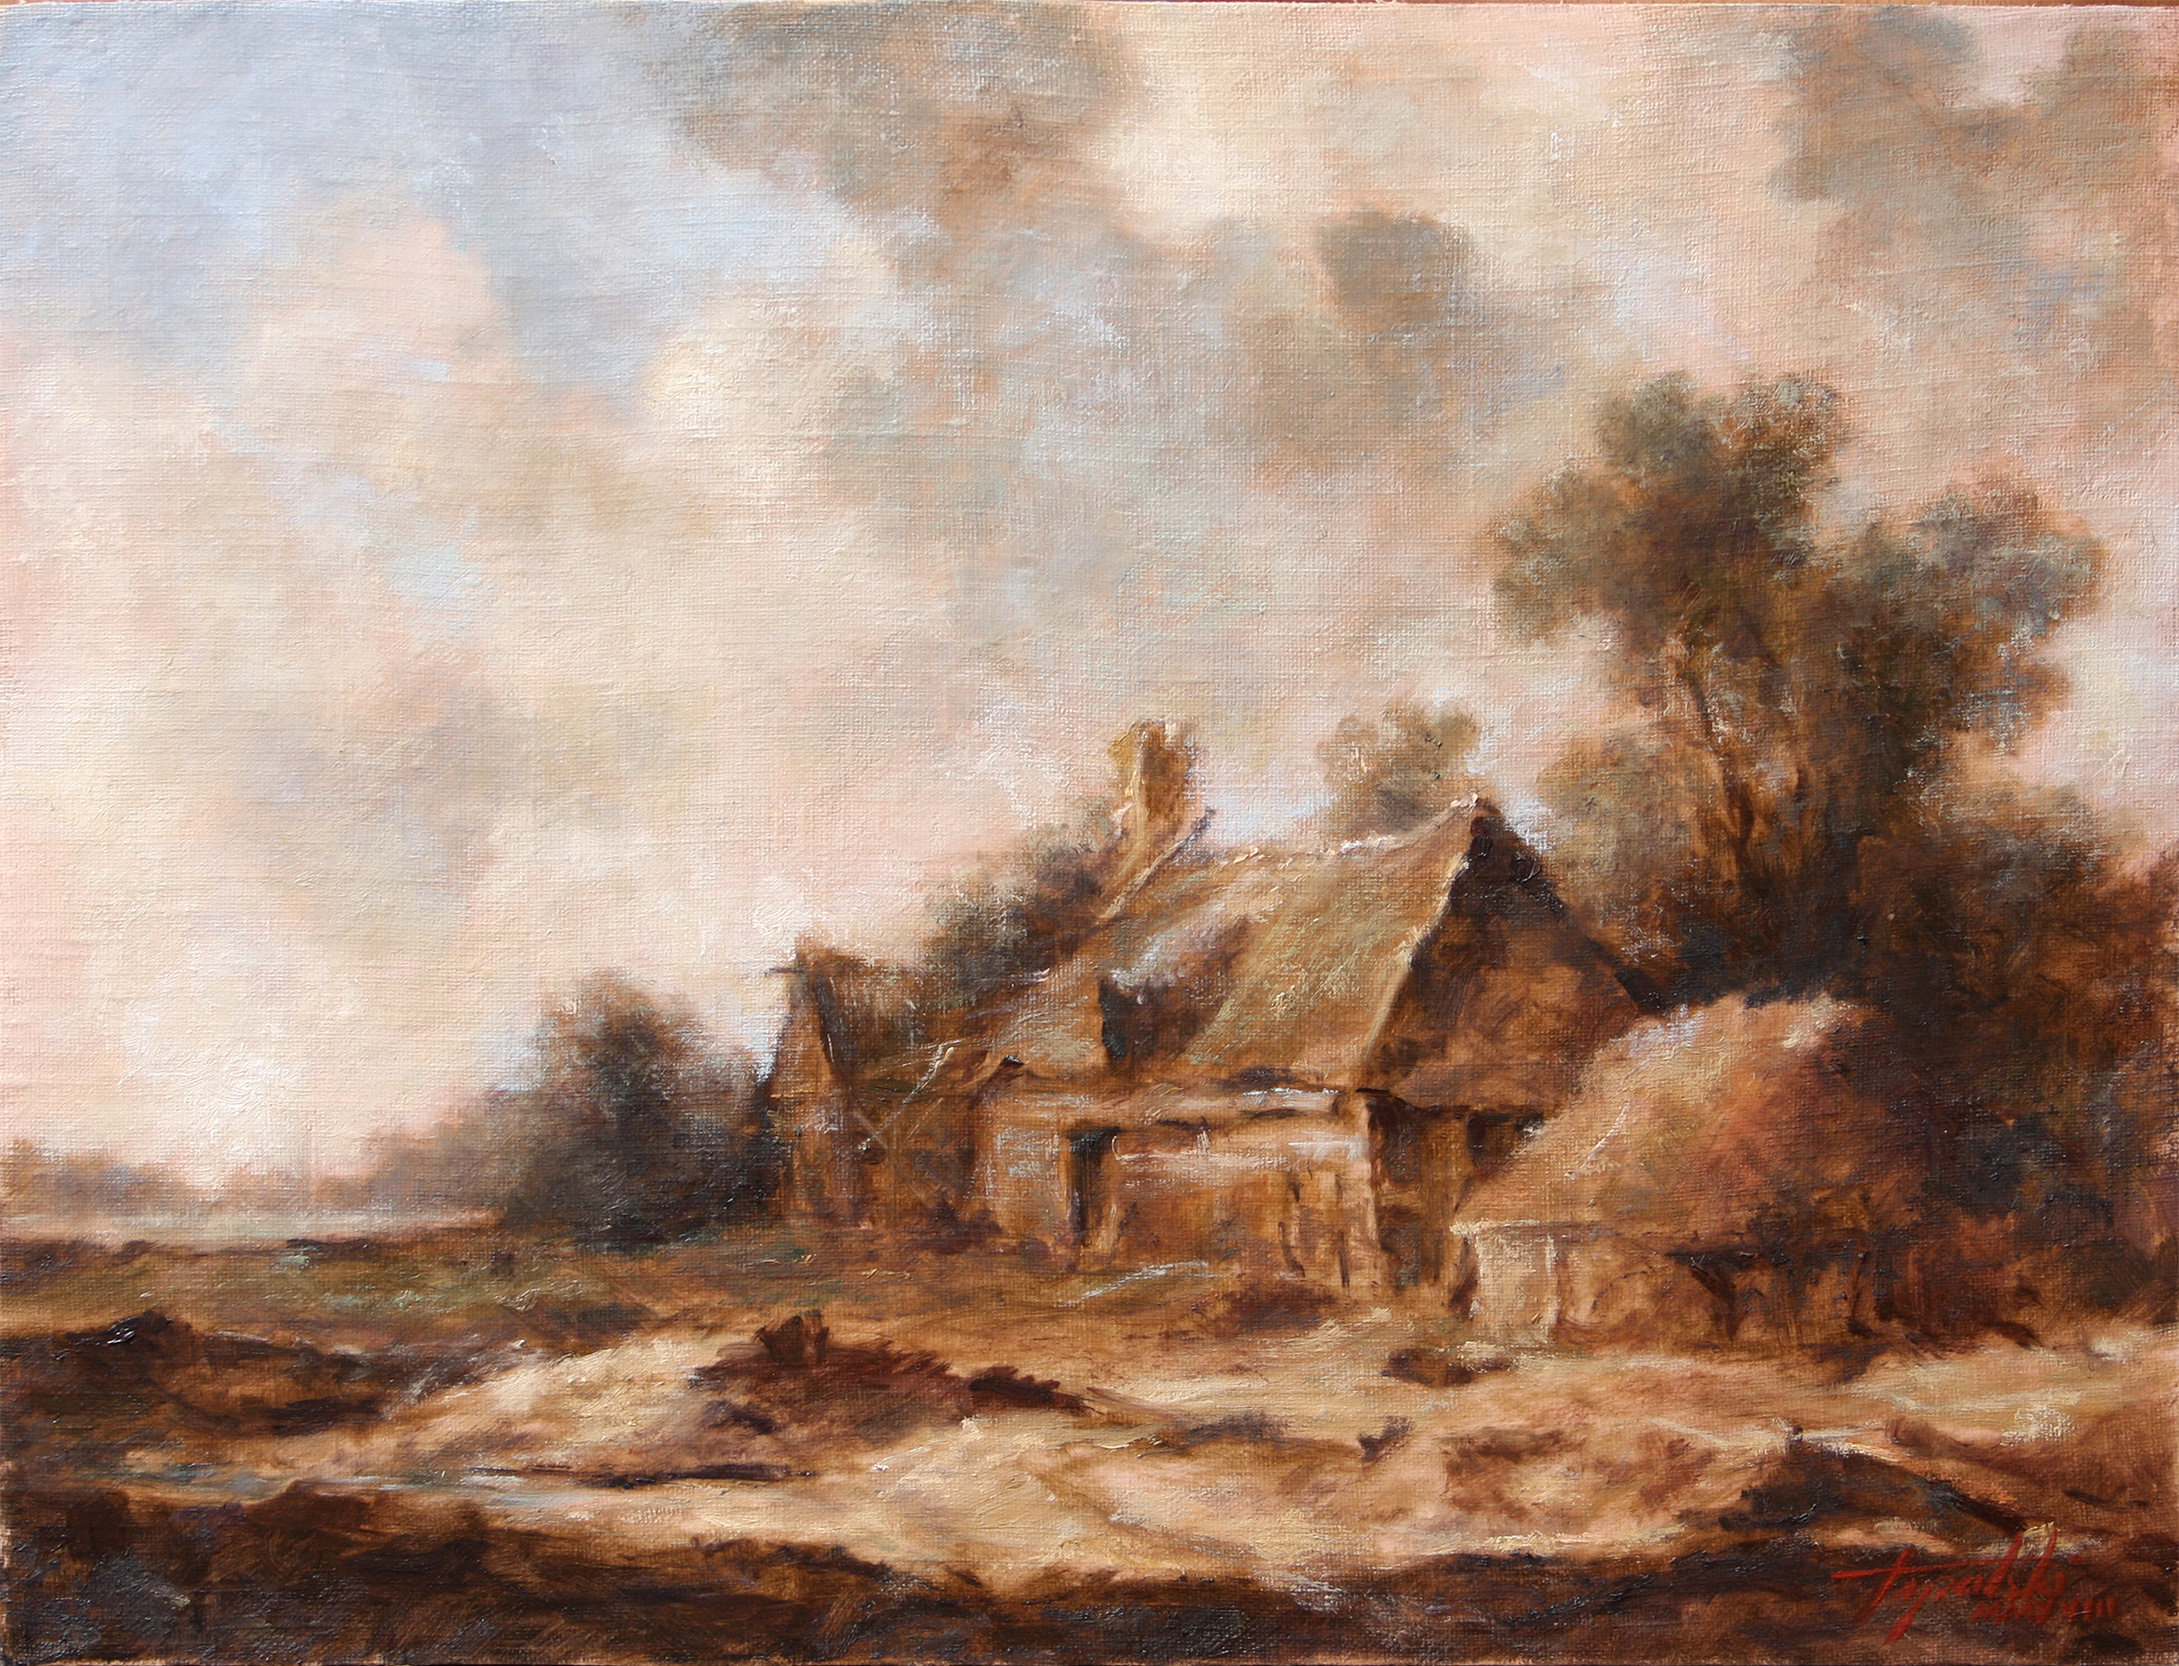 Old Country house – Landscape Oil painting | Fine Arts Gallery